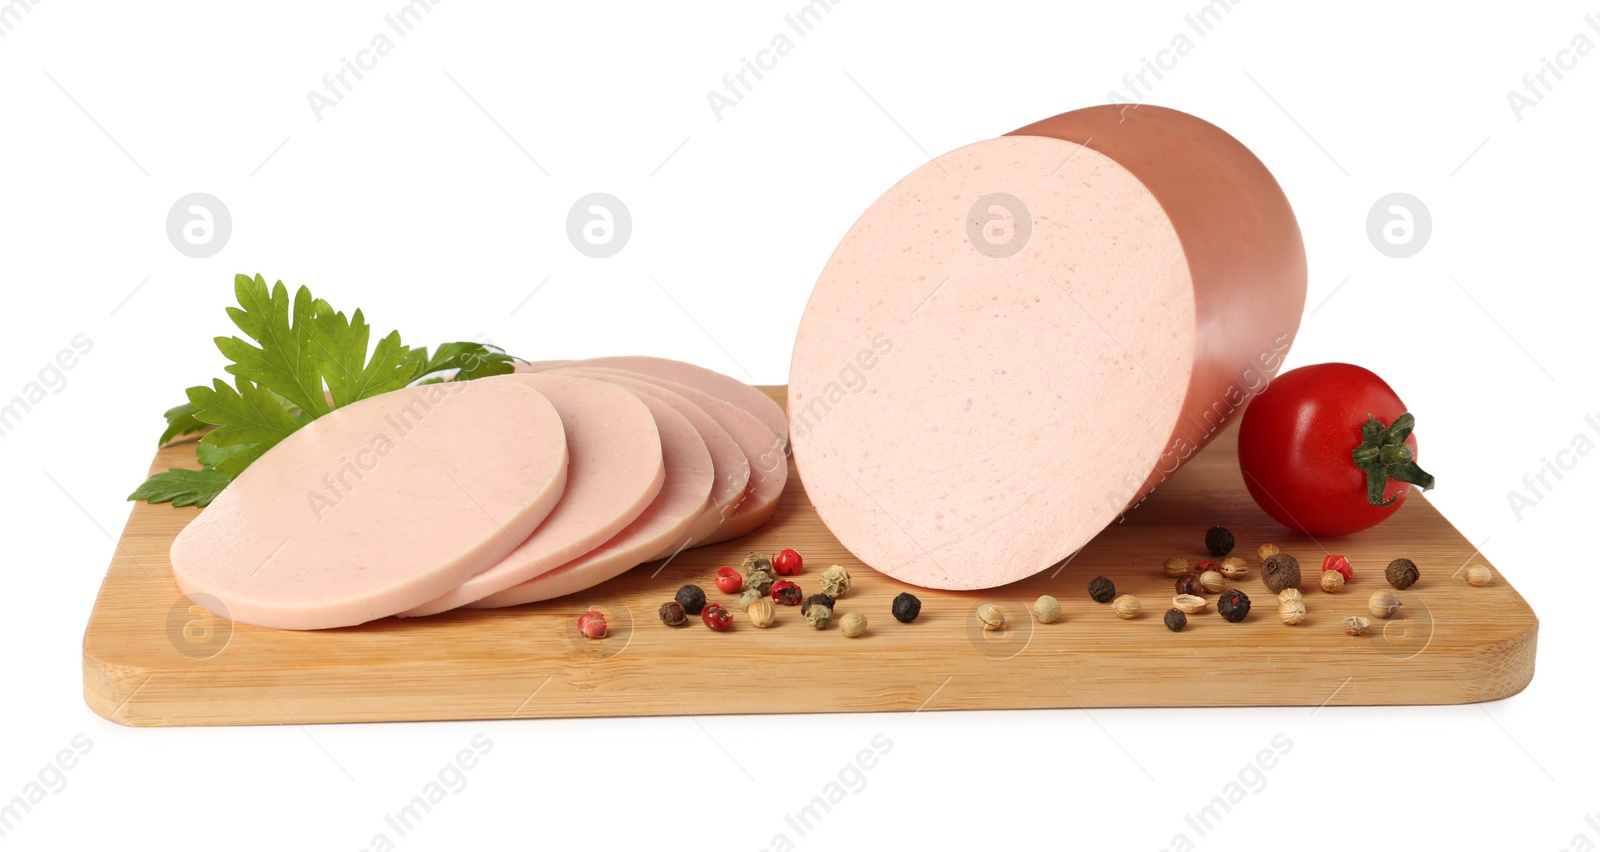 Photo of Wooden board with delicious boiled sausage, tomato, parsley and peppercorns isolated on white